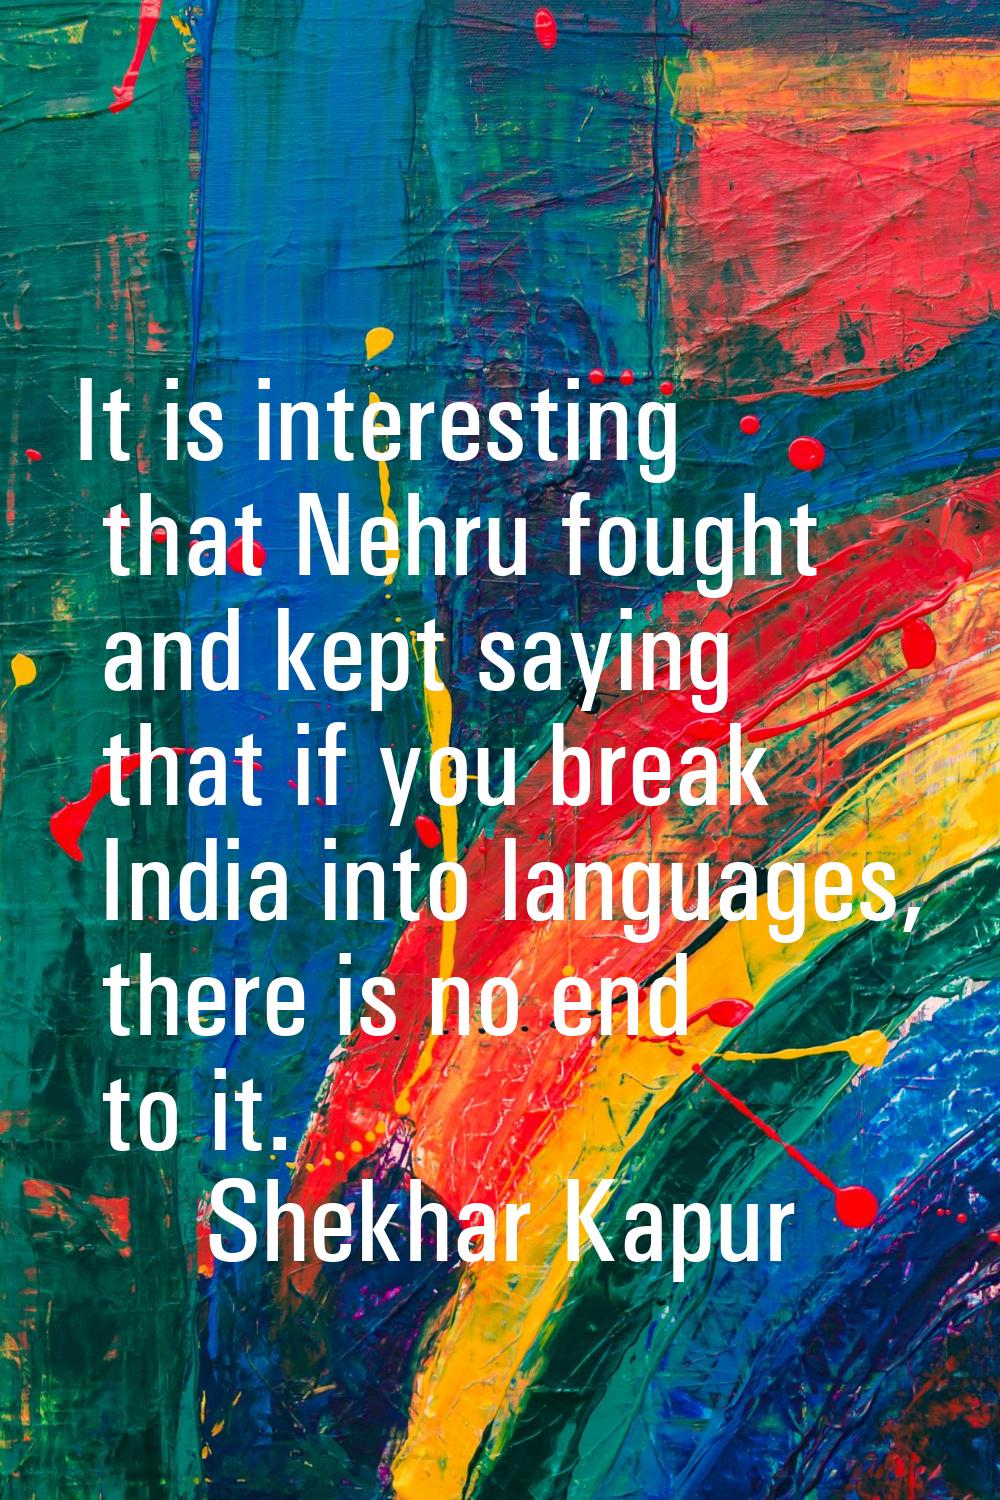 It is interesting that Nehru fought and kept saying that if you break India into languages, there i